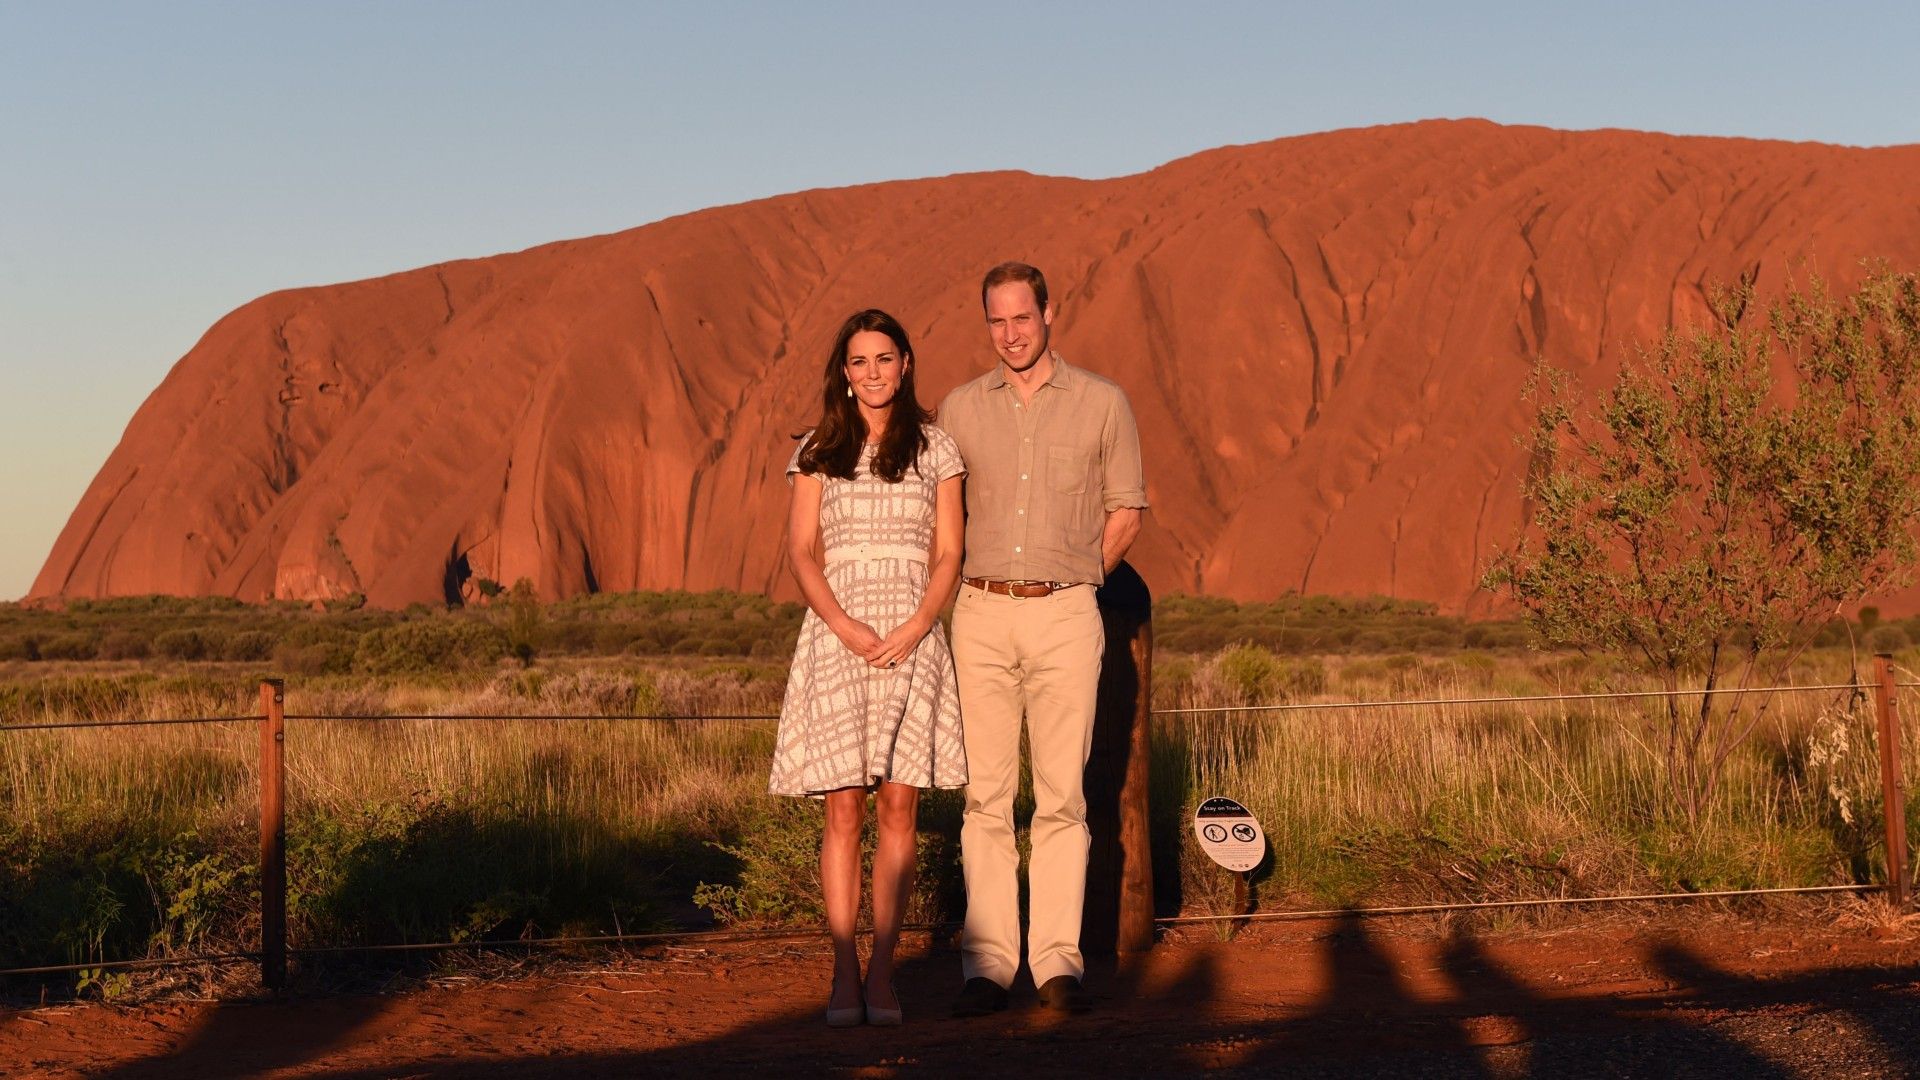 <p>                     Prince William's trip to Australia in 2014 was monumental for many reasons - he had his firstborn son, George, with him, and he and Kate Middleton got to see how far-flung their popularity was.                   </p>                                      <p>                     But one particularly sweet and melancholic moment for the Prince of Wales might have been when he found himself echoing a trip his parents took decades before.                   </p>                                      <p>                     The late Princess Diana and the then Prince Charles toured Australia in 1983 and posed at Ayers Rock.                   </p>                                      <p>                     In another coincidence, like William and Kate bringing a very young George, Diana reportedly insisted on bringing William (who was nine months old) on the trip, too.                   </p>